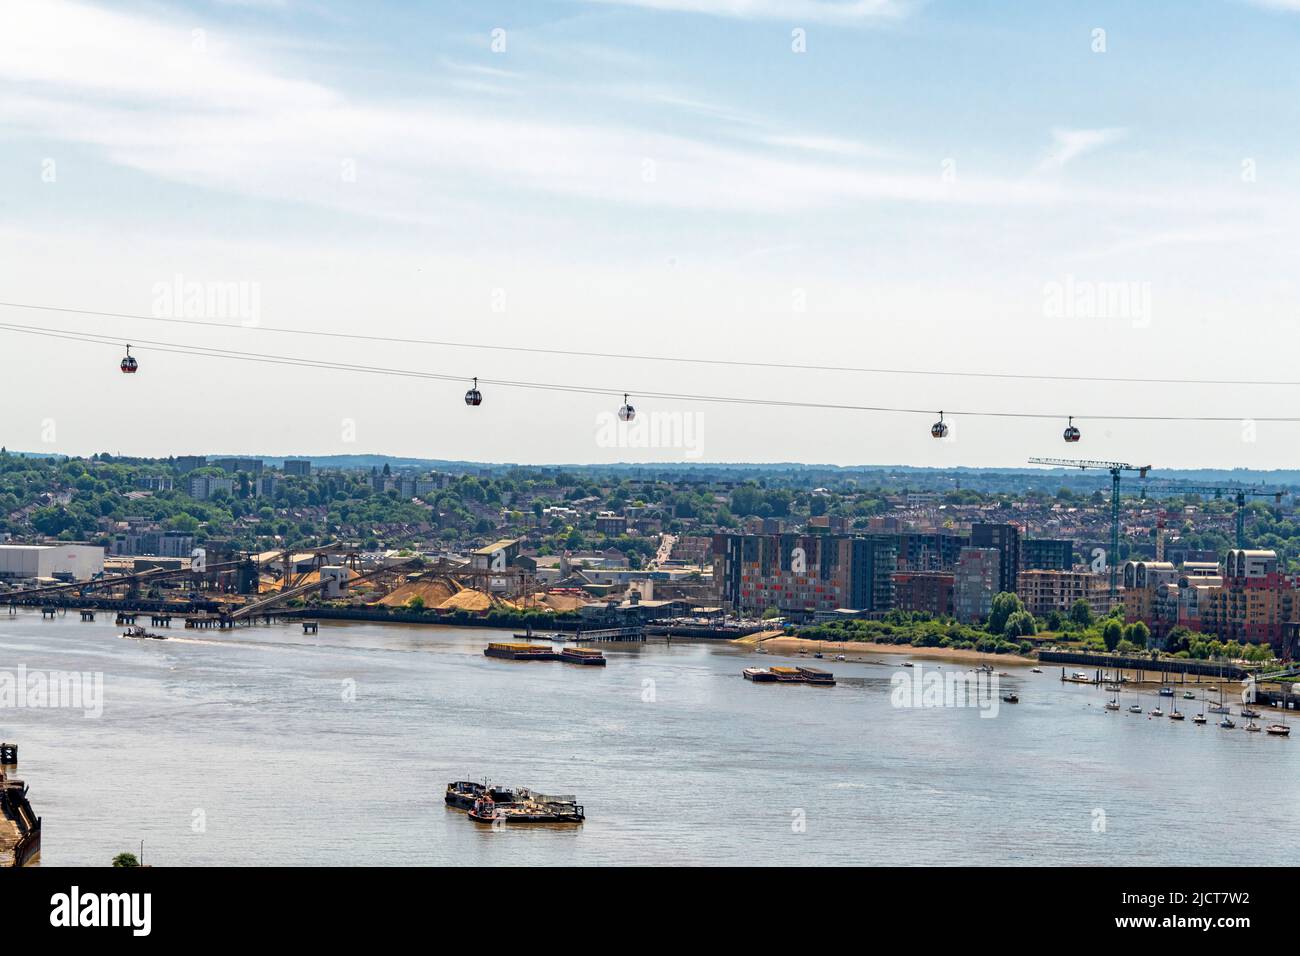 Aerial photo of the Emirates Royal Docks Gondola crossing the River Thames at Greenwich Peninsular. Stock Photo